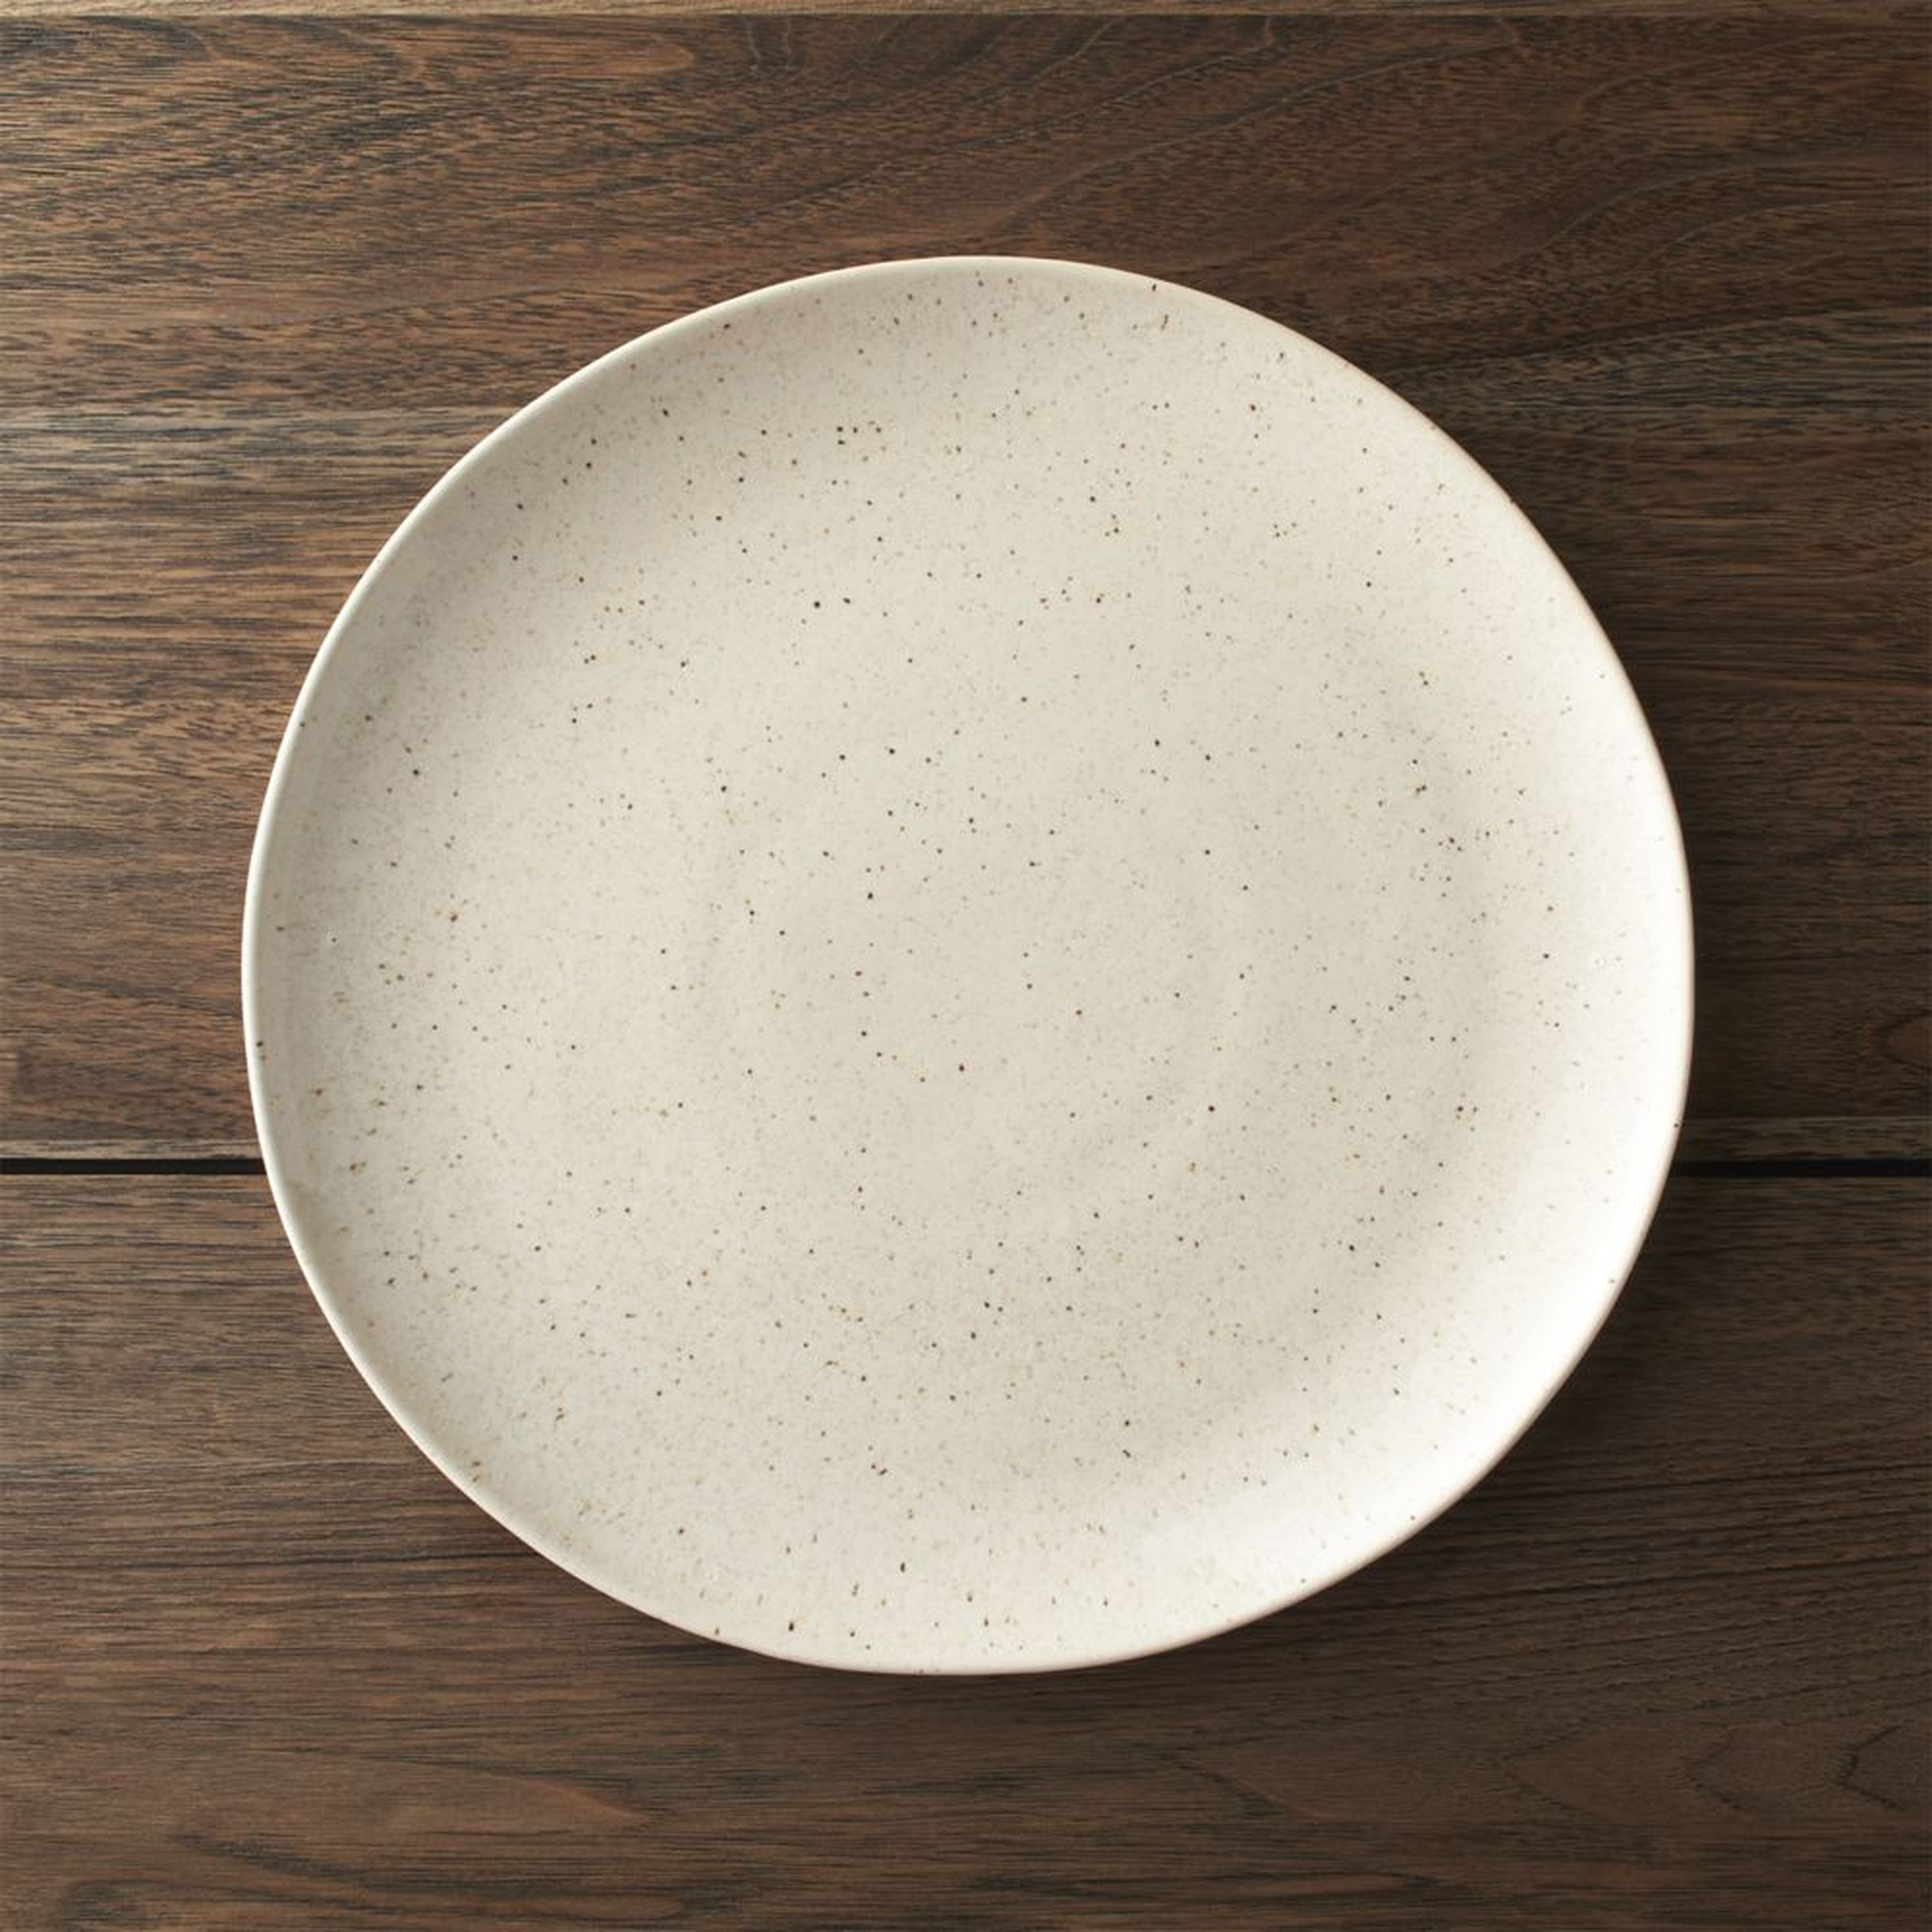 Wilder Dinner Plate - Crate and Barrel